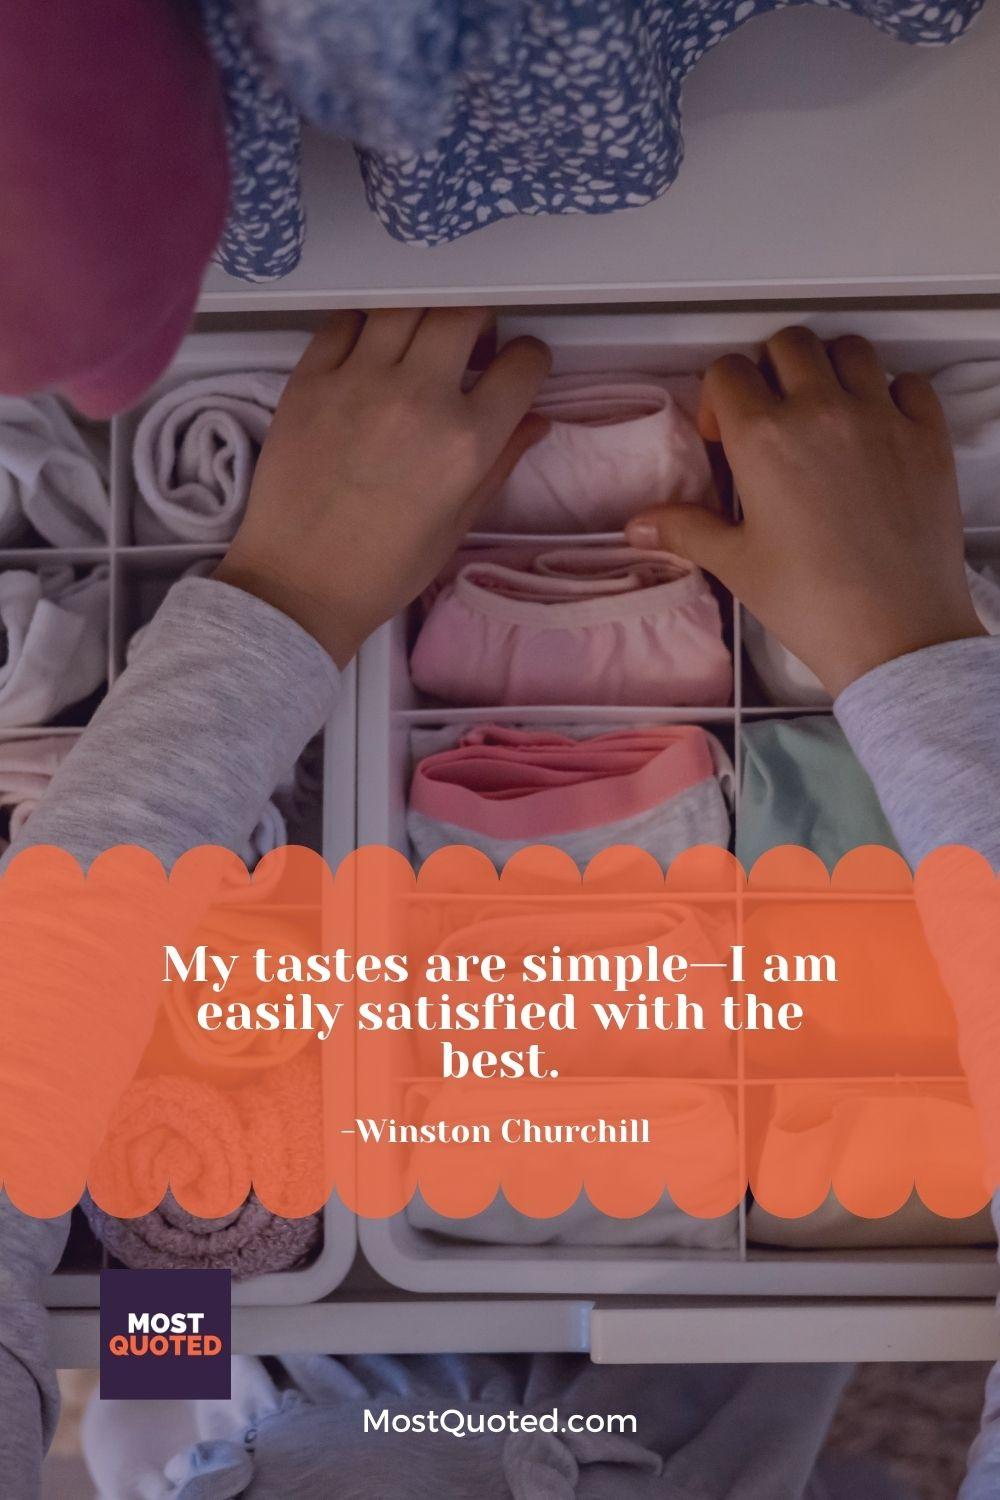 My tastes are simple—I am easily satisfied with the best. - Winston Churchill